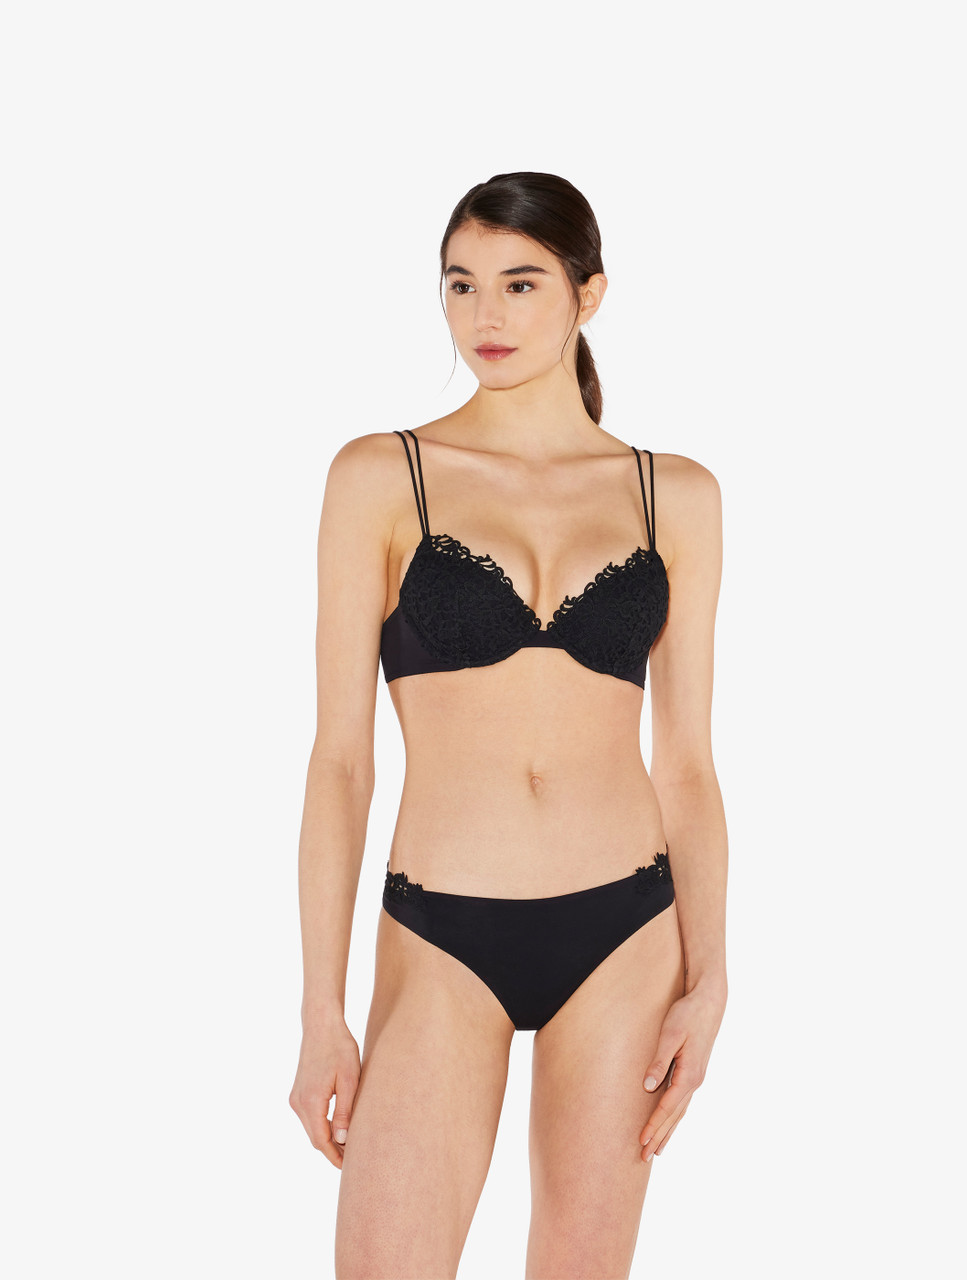 Underwire bra with lace, push up and mesh in back – Caprice Se tu